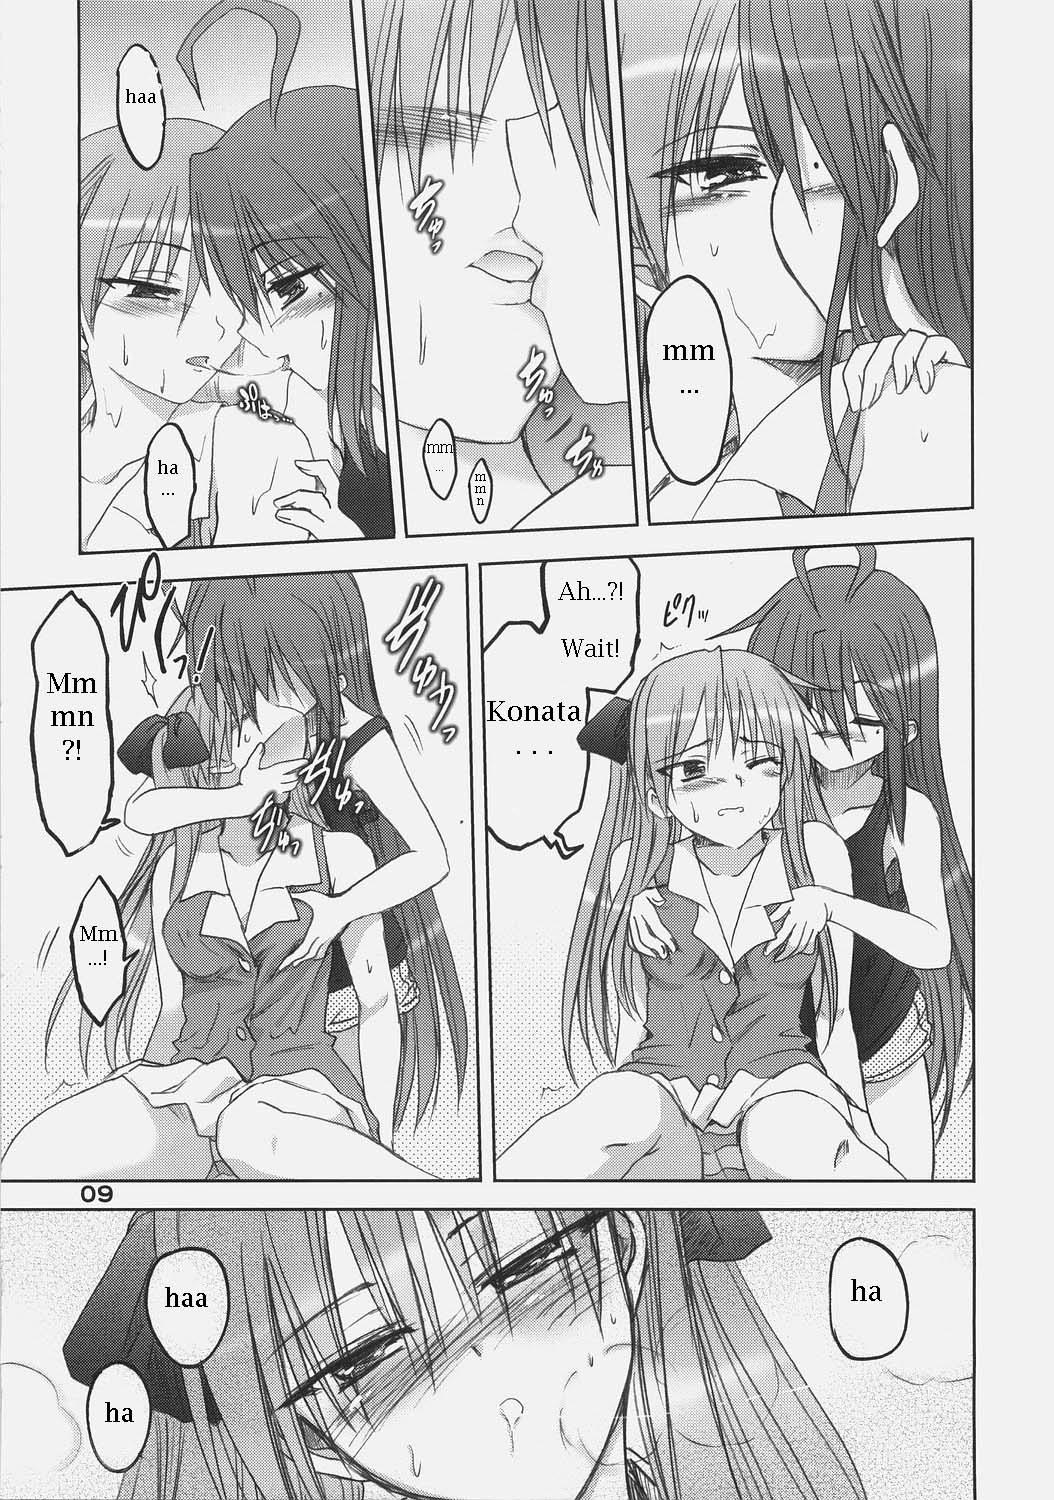 Time Kagami no Ashi no Ura | The Soles of Kagami's Feet - Lucky star Blowing - Page 6